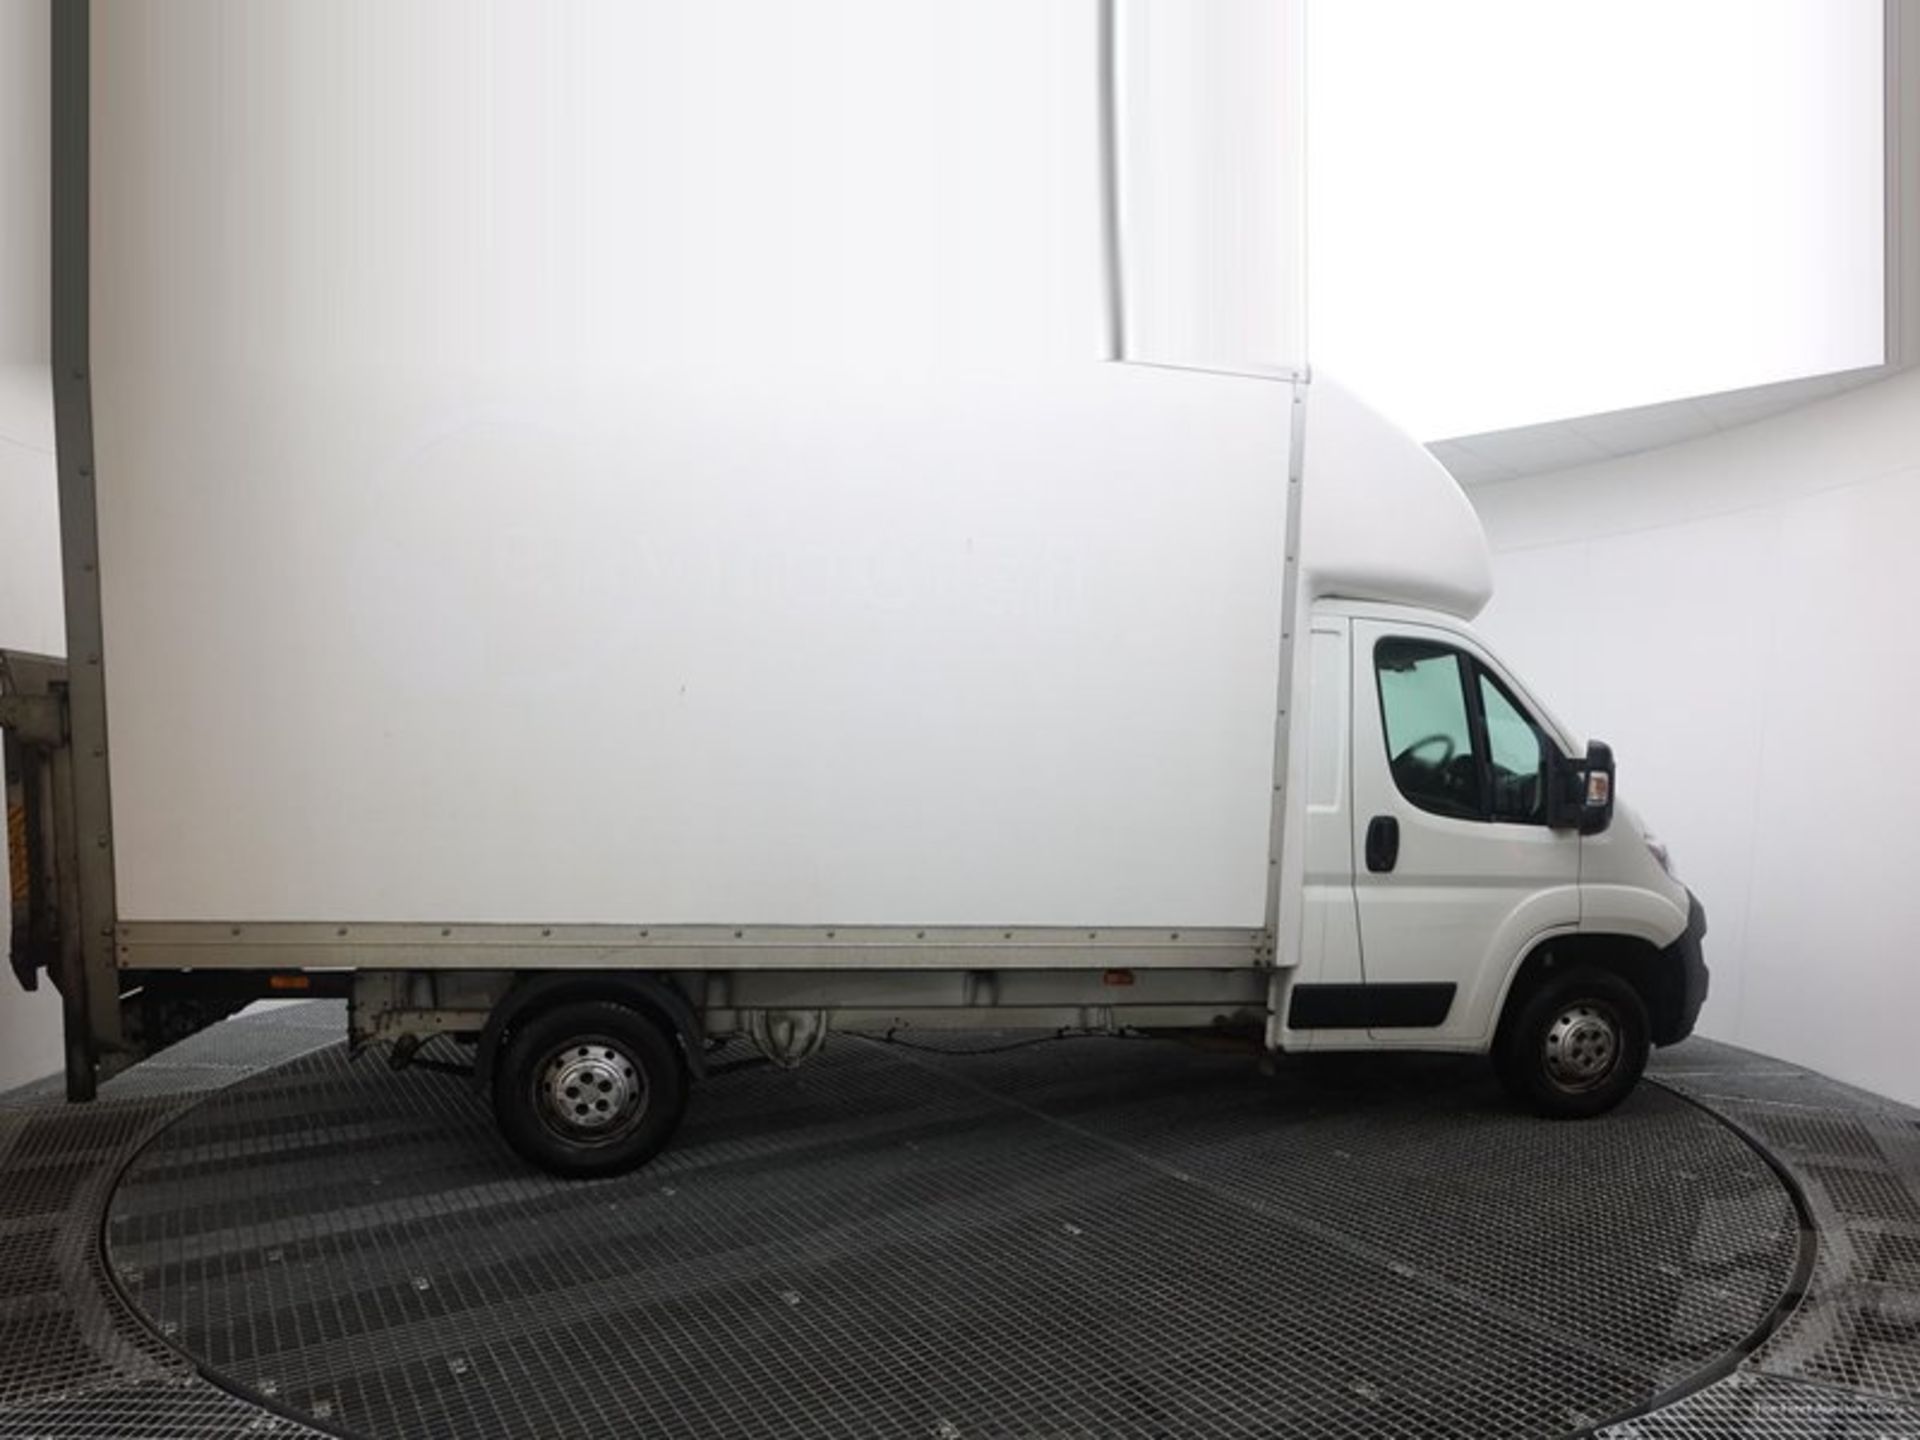 CITROEN RELAY 2.0HDI"160"LONG WHEEL BASE LUTON BOX VAN WITH ELECTRIC TAIL-LIFT -2020 MODEL -1 OWNER - Image 4 of 10